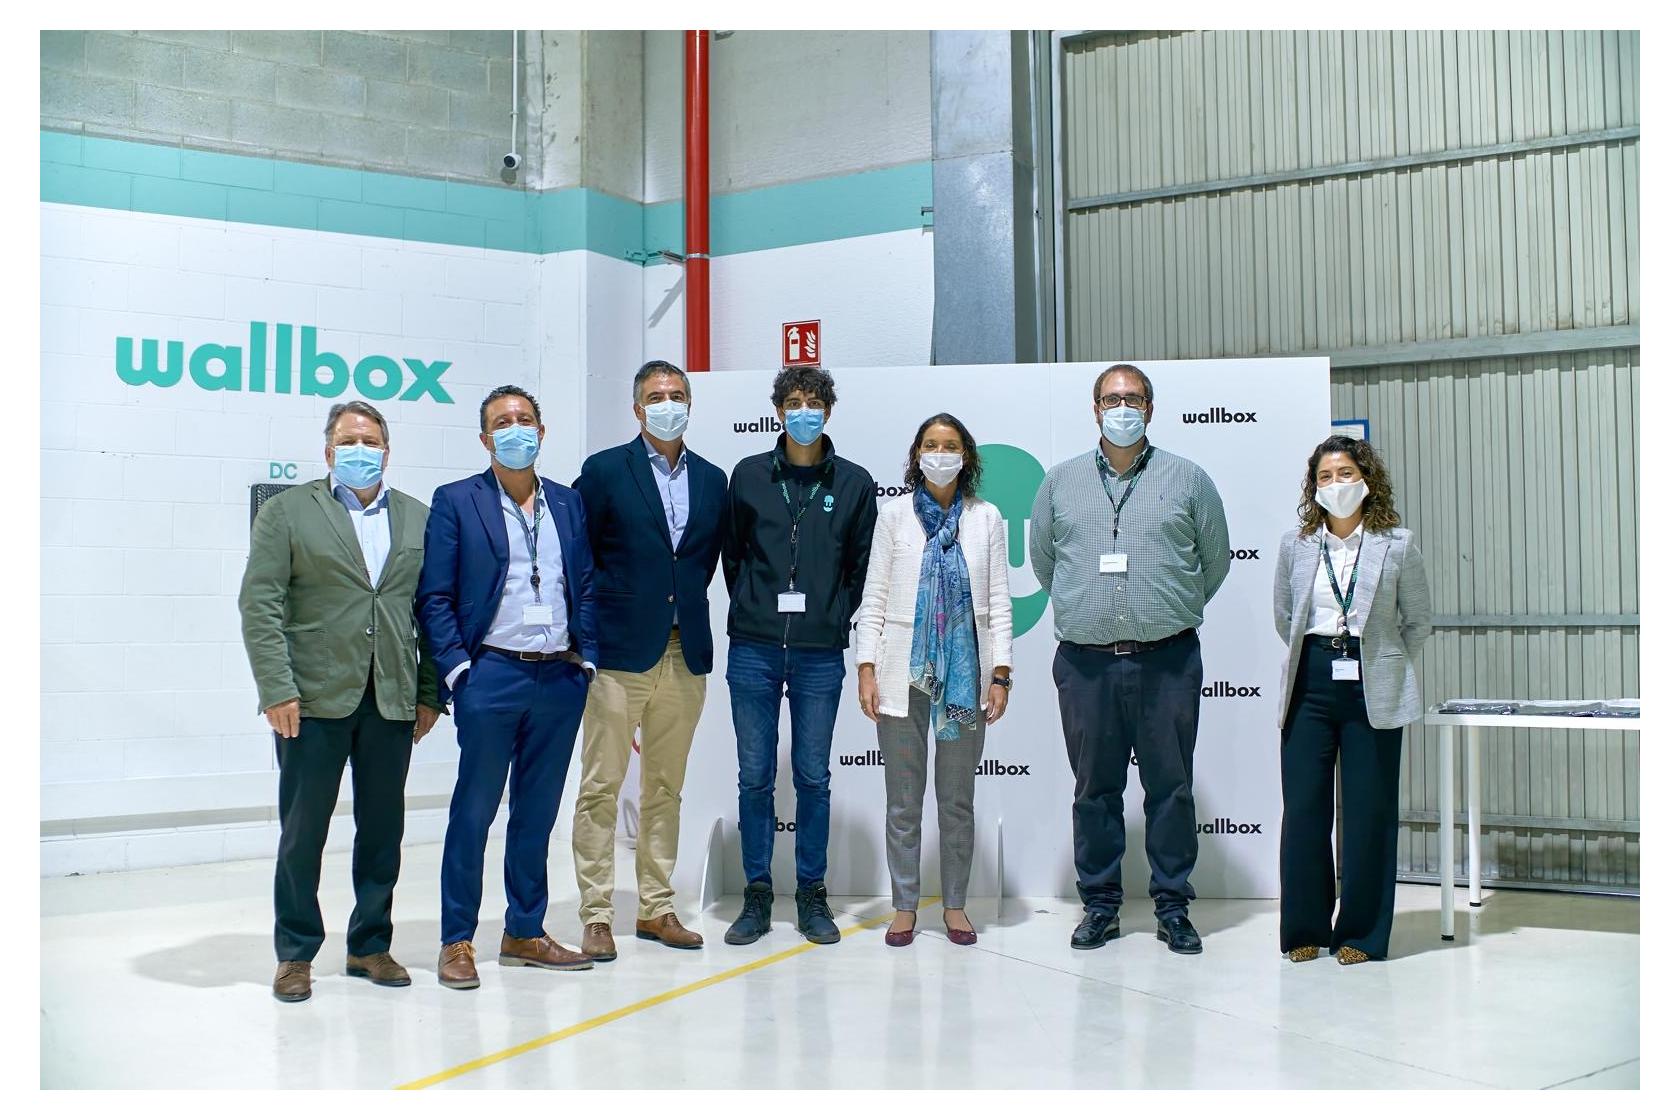 Spain’s Minister of Industry, Trade and Tourism visits Wallbox